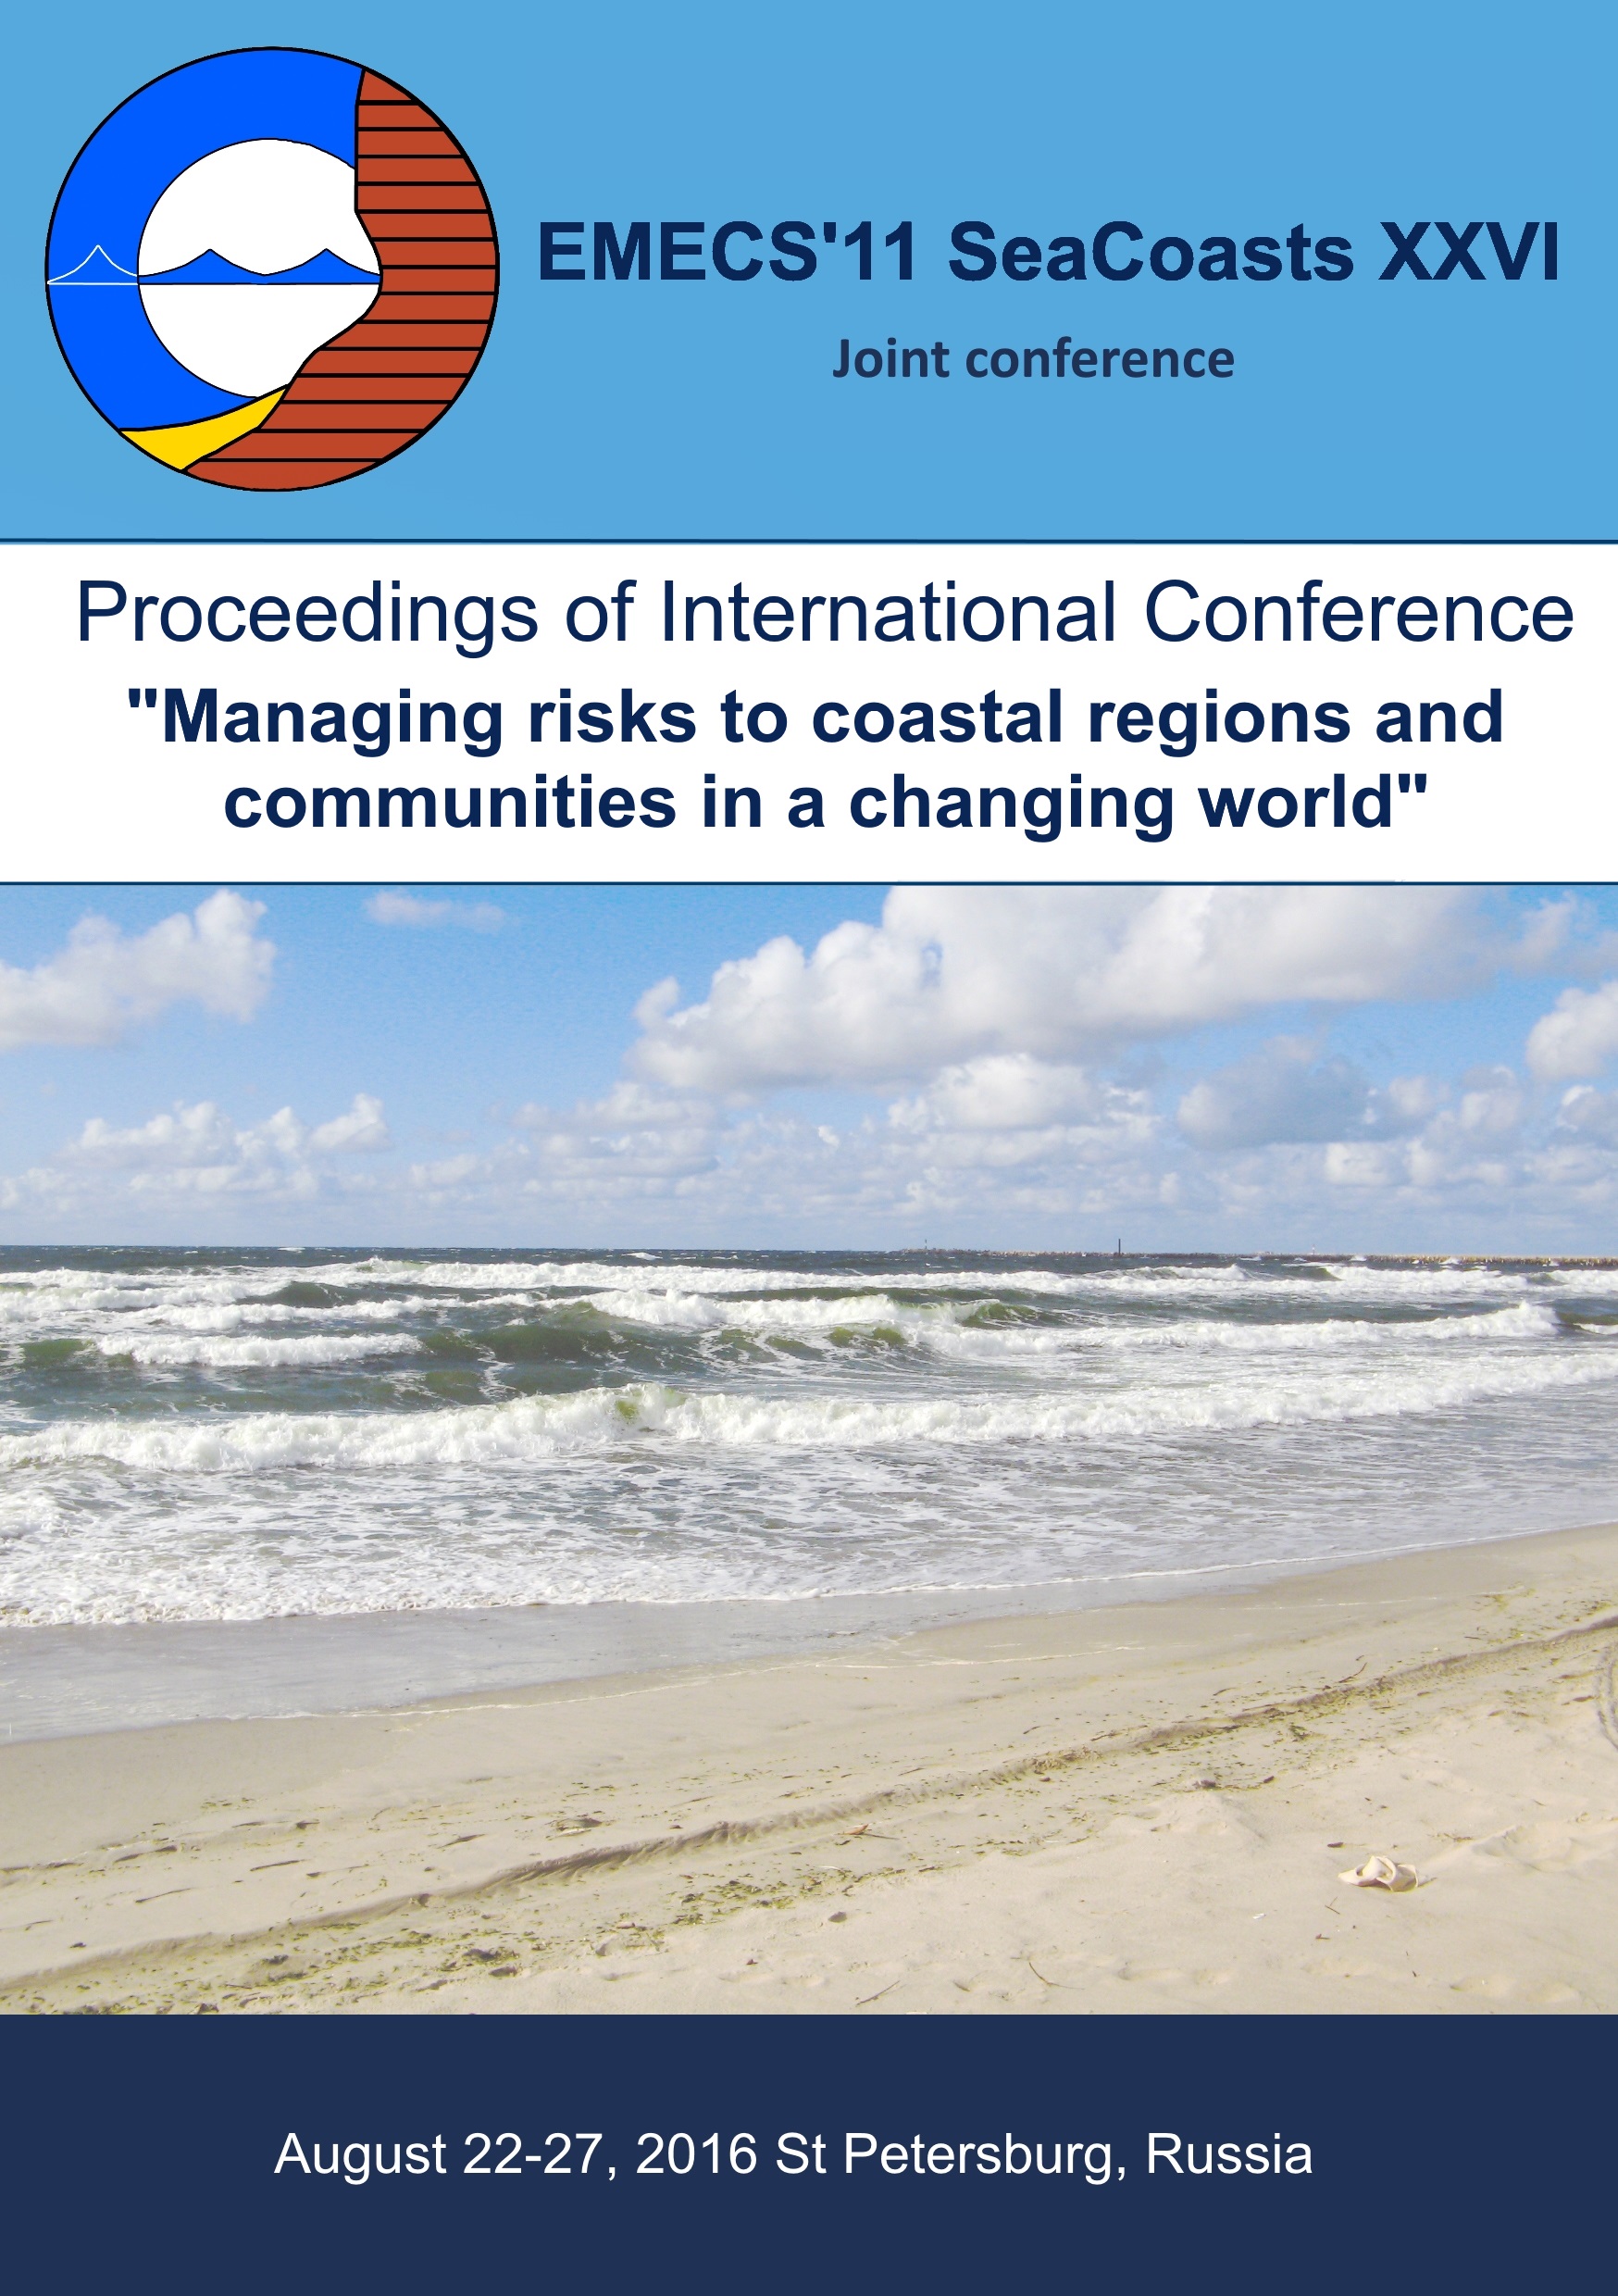                         SUSTAINABILITY IN THE FUTURE DEVELOPMENT OF THE MARITIME TRANSPORT IN CUBA
            